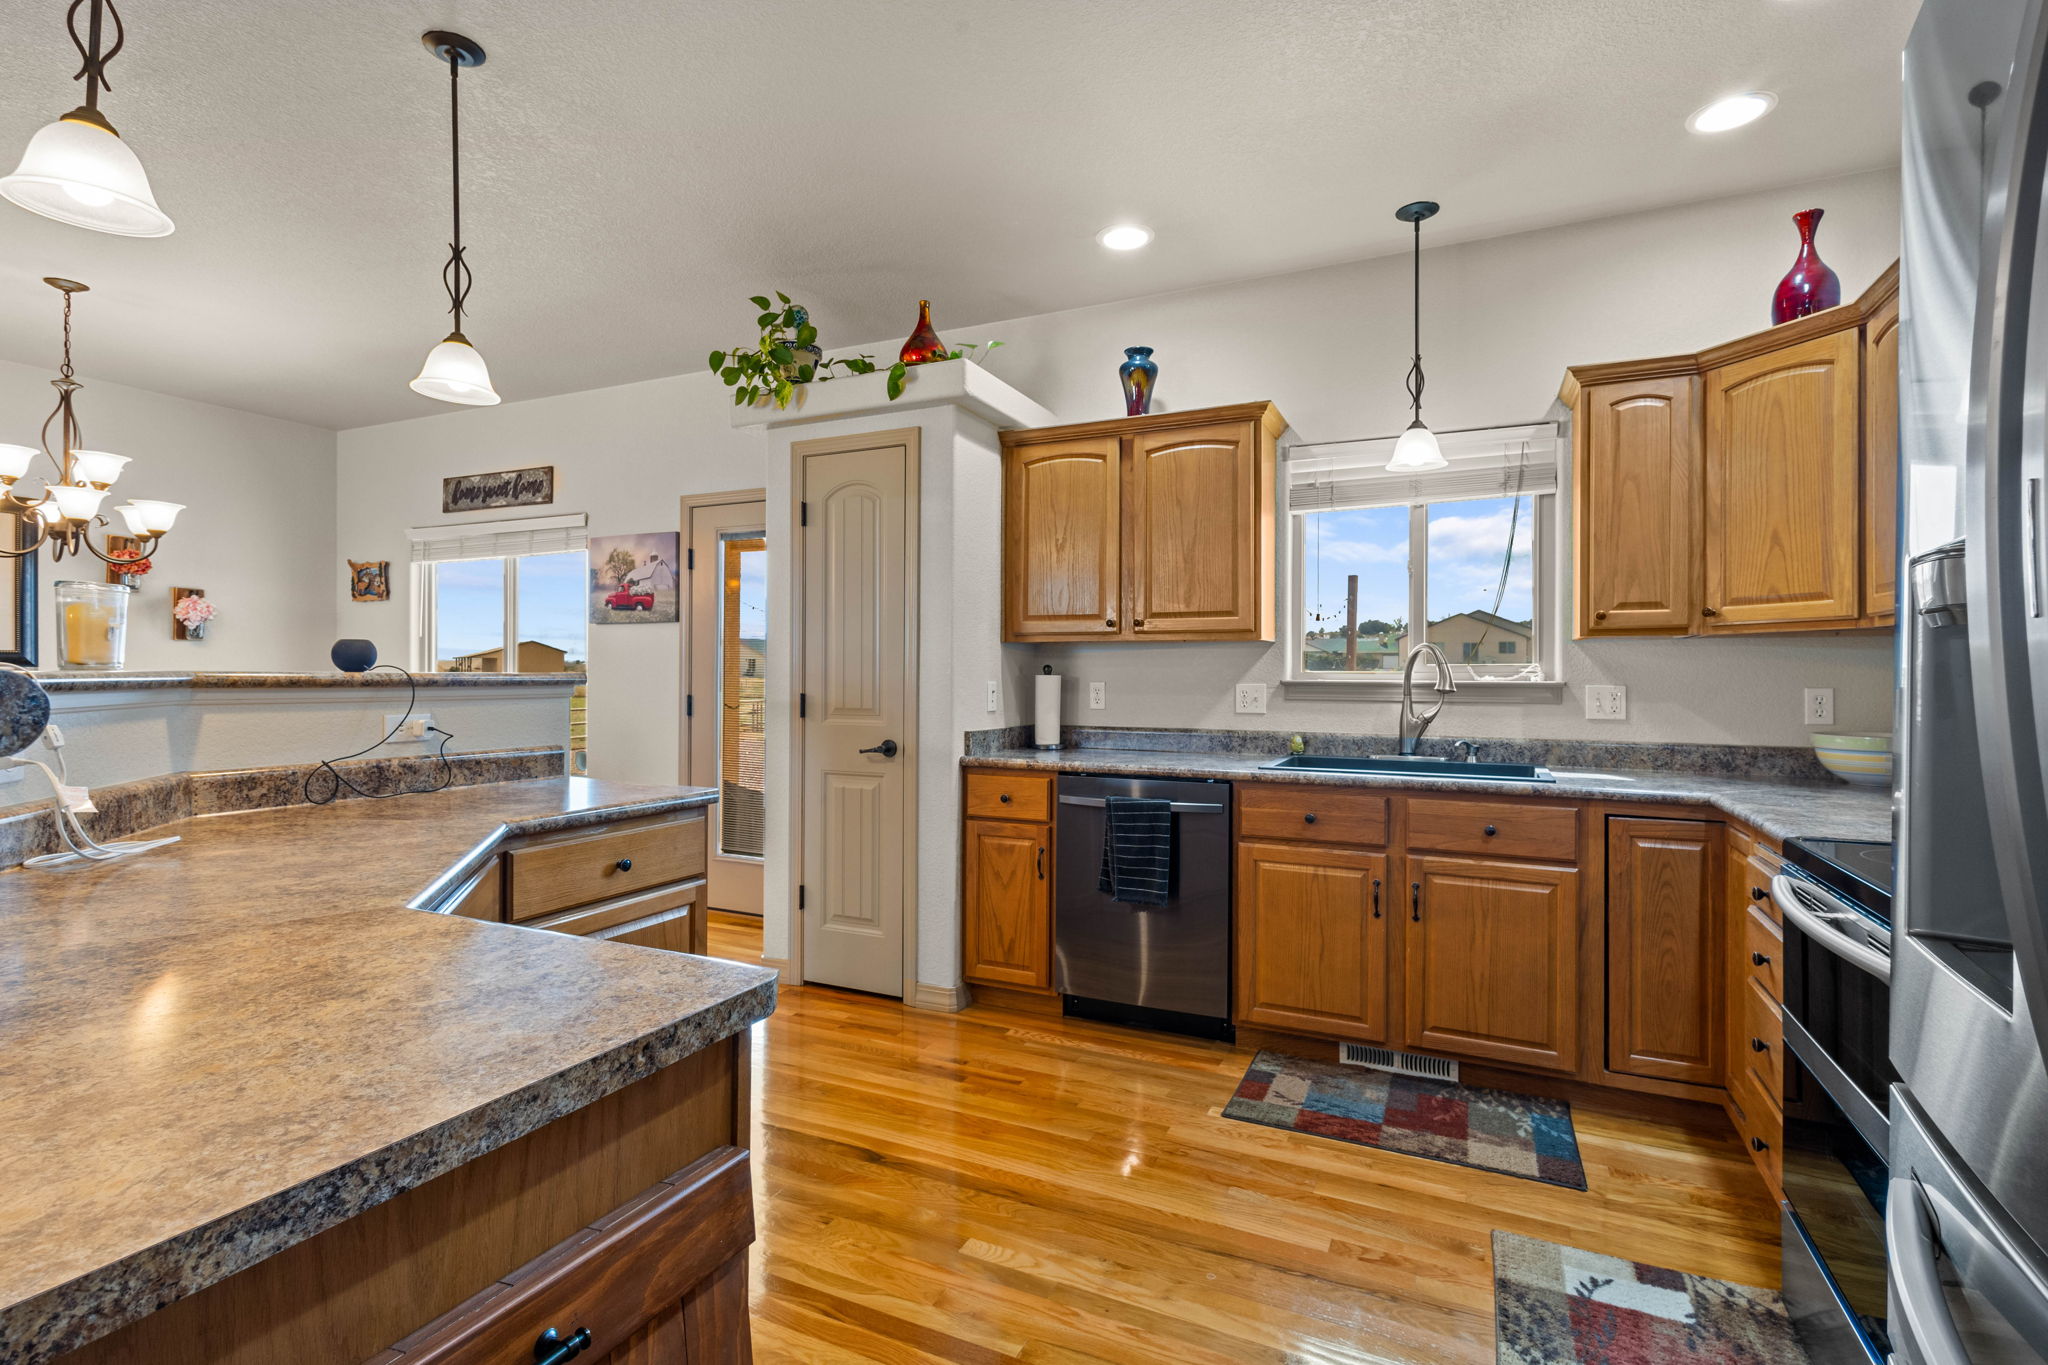 Kitchen with gleaming hardwood floors, smooth top counters and pantry.